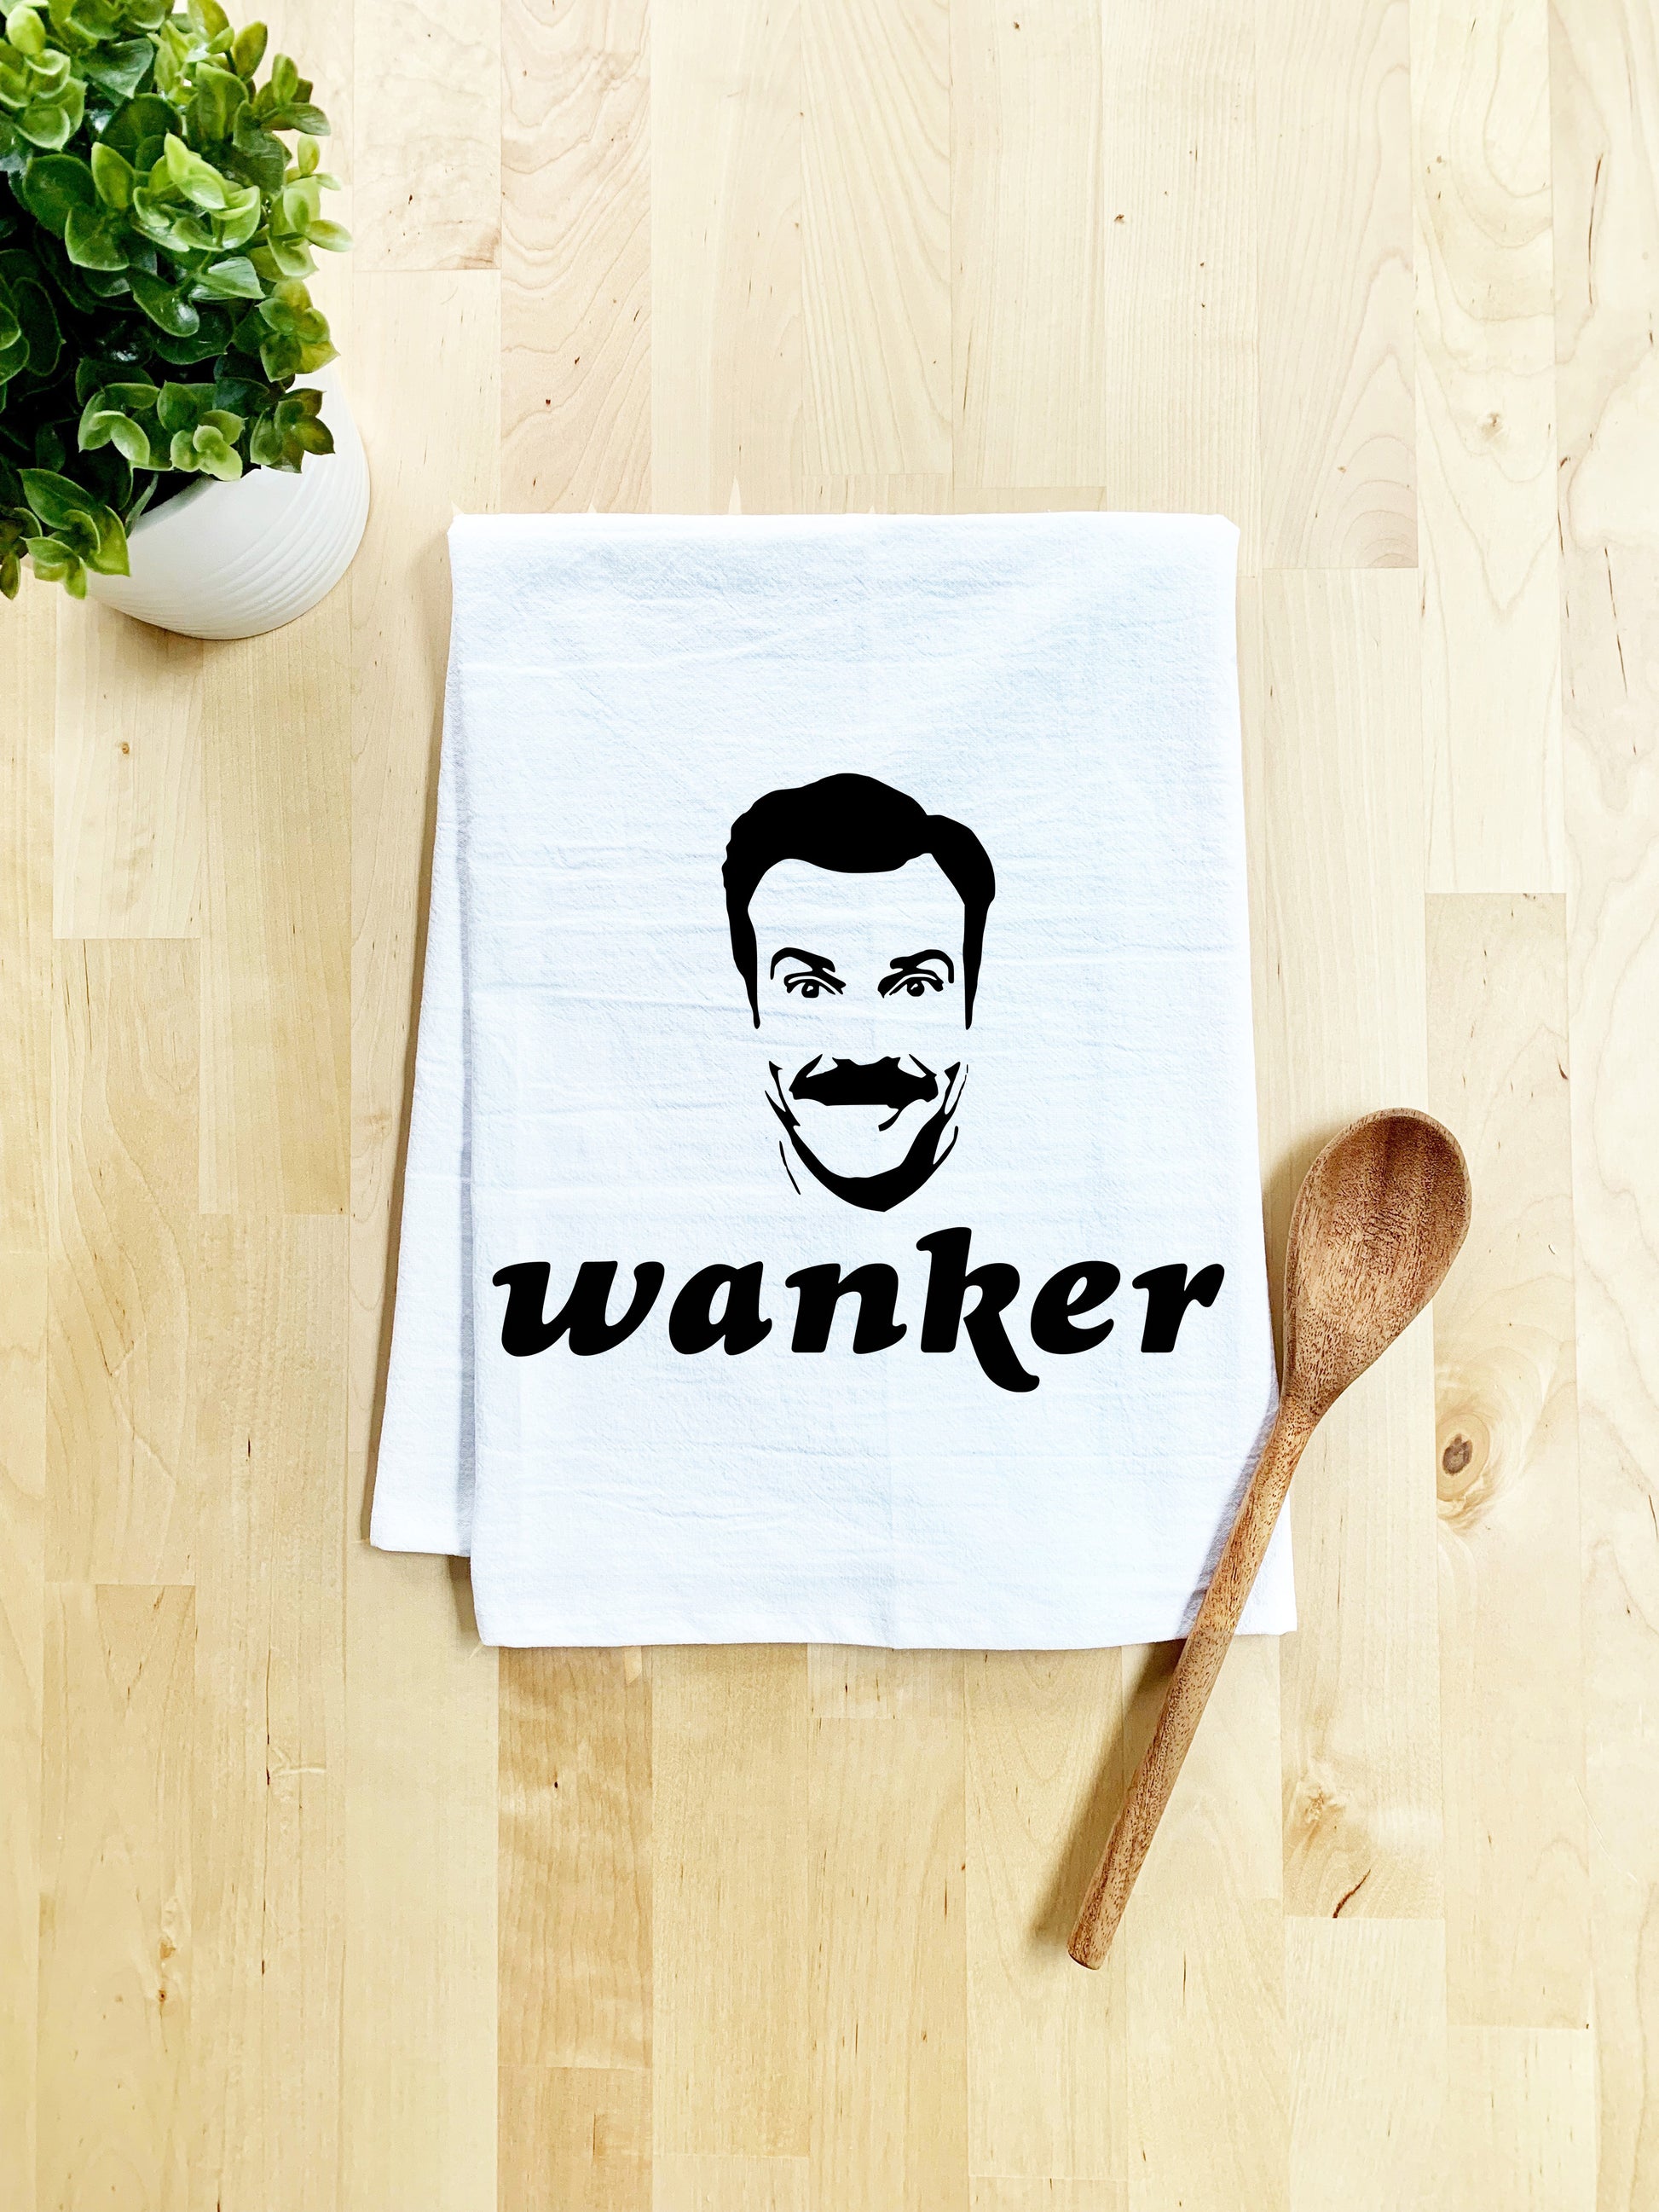 Wanker (Ted Lasso) Dish Towel - White Or Gray - MoonlightMakers